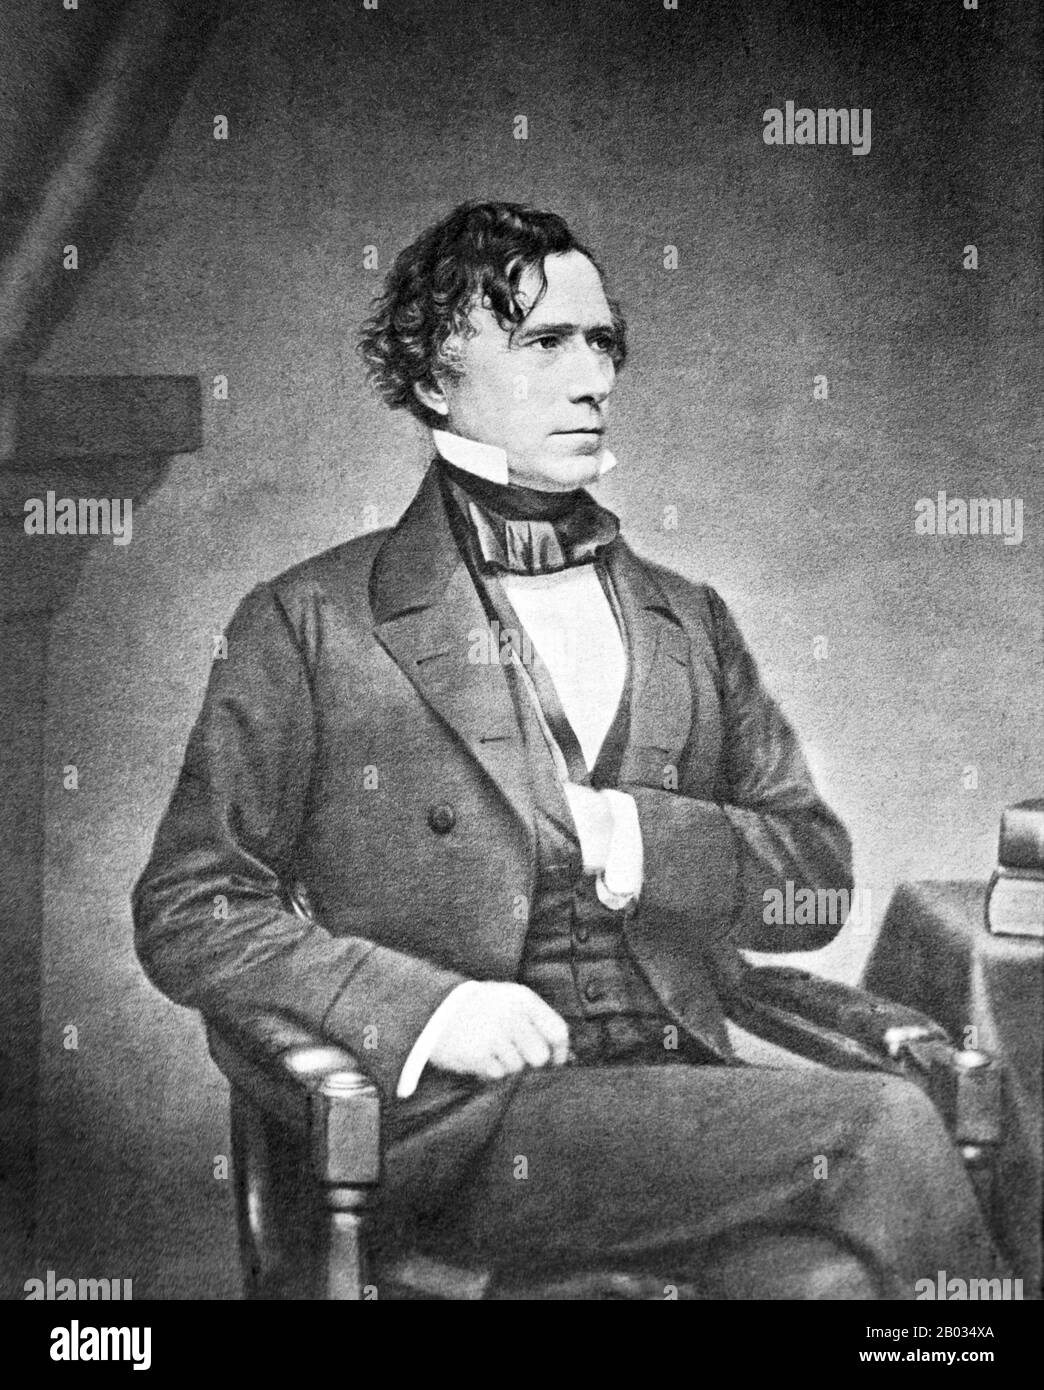 Franklin Pierce (November 23, 1804 – October 8, 1869) was the 14th President of the United States (1853–57). Pierce was a northern Democrat who saw the abolitionist movement as a fundamental threat to the unity of the nation.  His polarizing actions in championing and signing the Kansas–Nebraska Act and enforcing the Fugitive Slave Act failed to stem intersectional conflict, setting the stage for Southern secession. Stock Photo